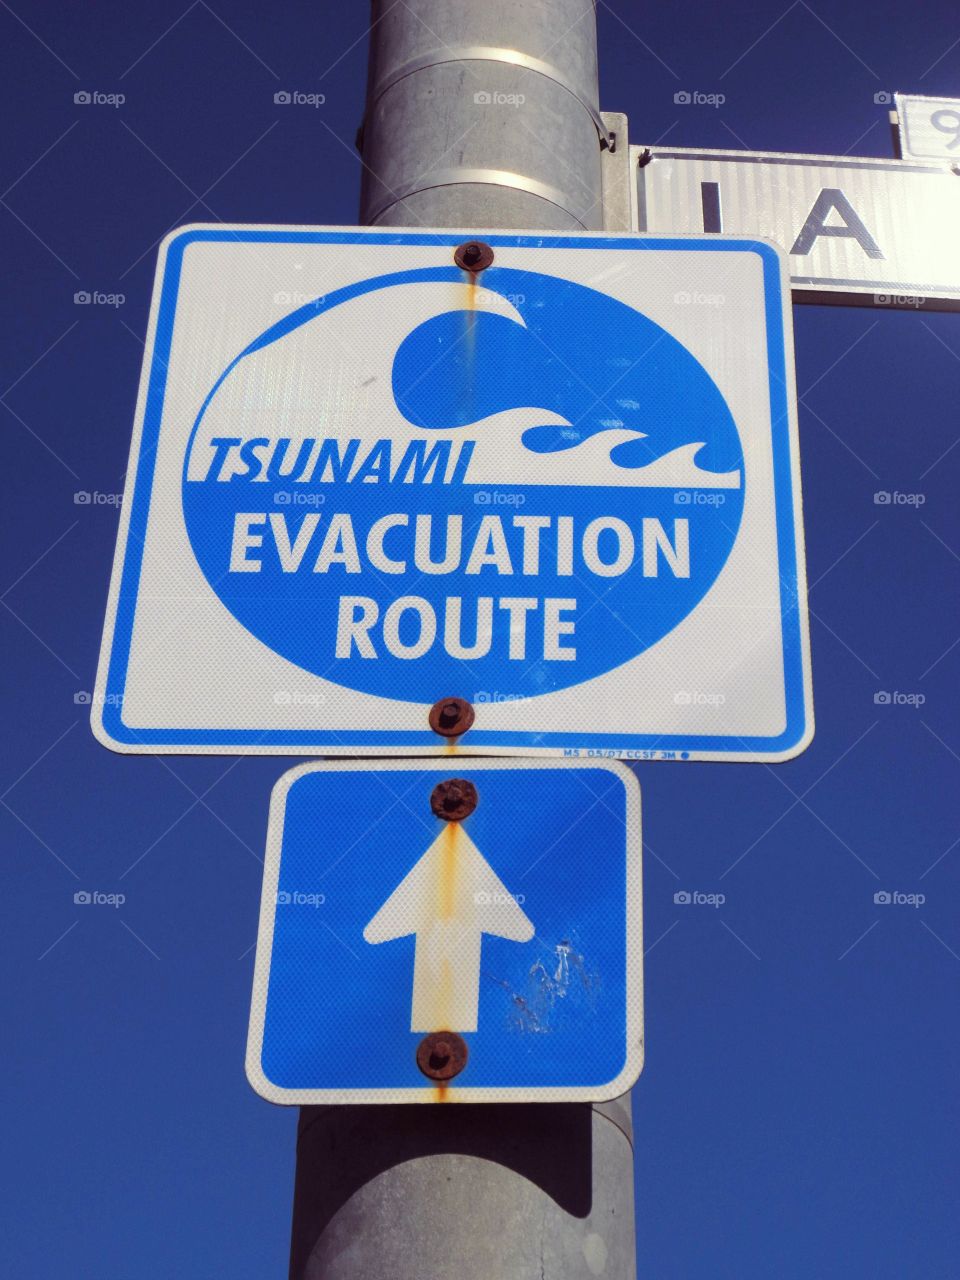 Hm... it's good to know, where to run. But do you think it'll really help us in a dangerous situation?
Tsunami evacuation sign, San Francisco Beach.